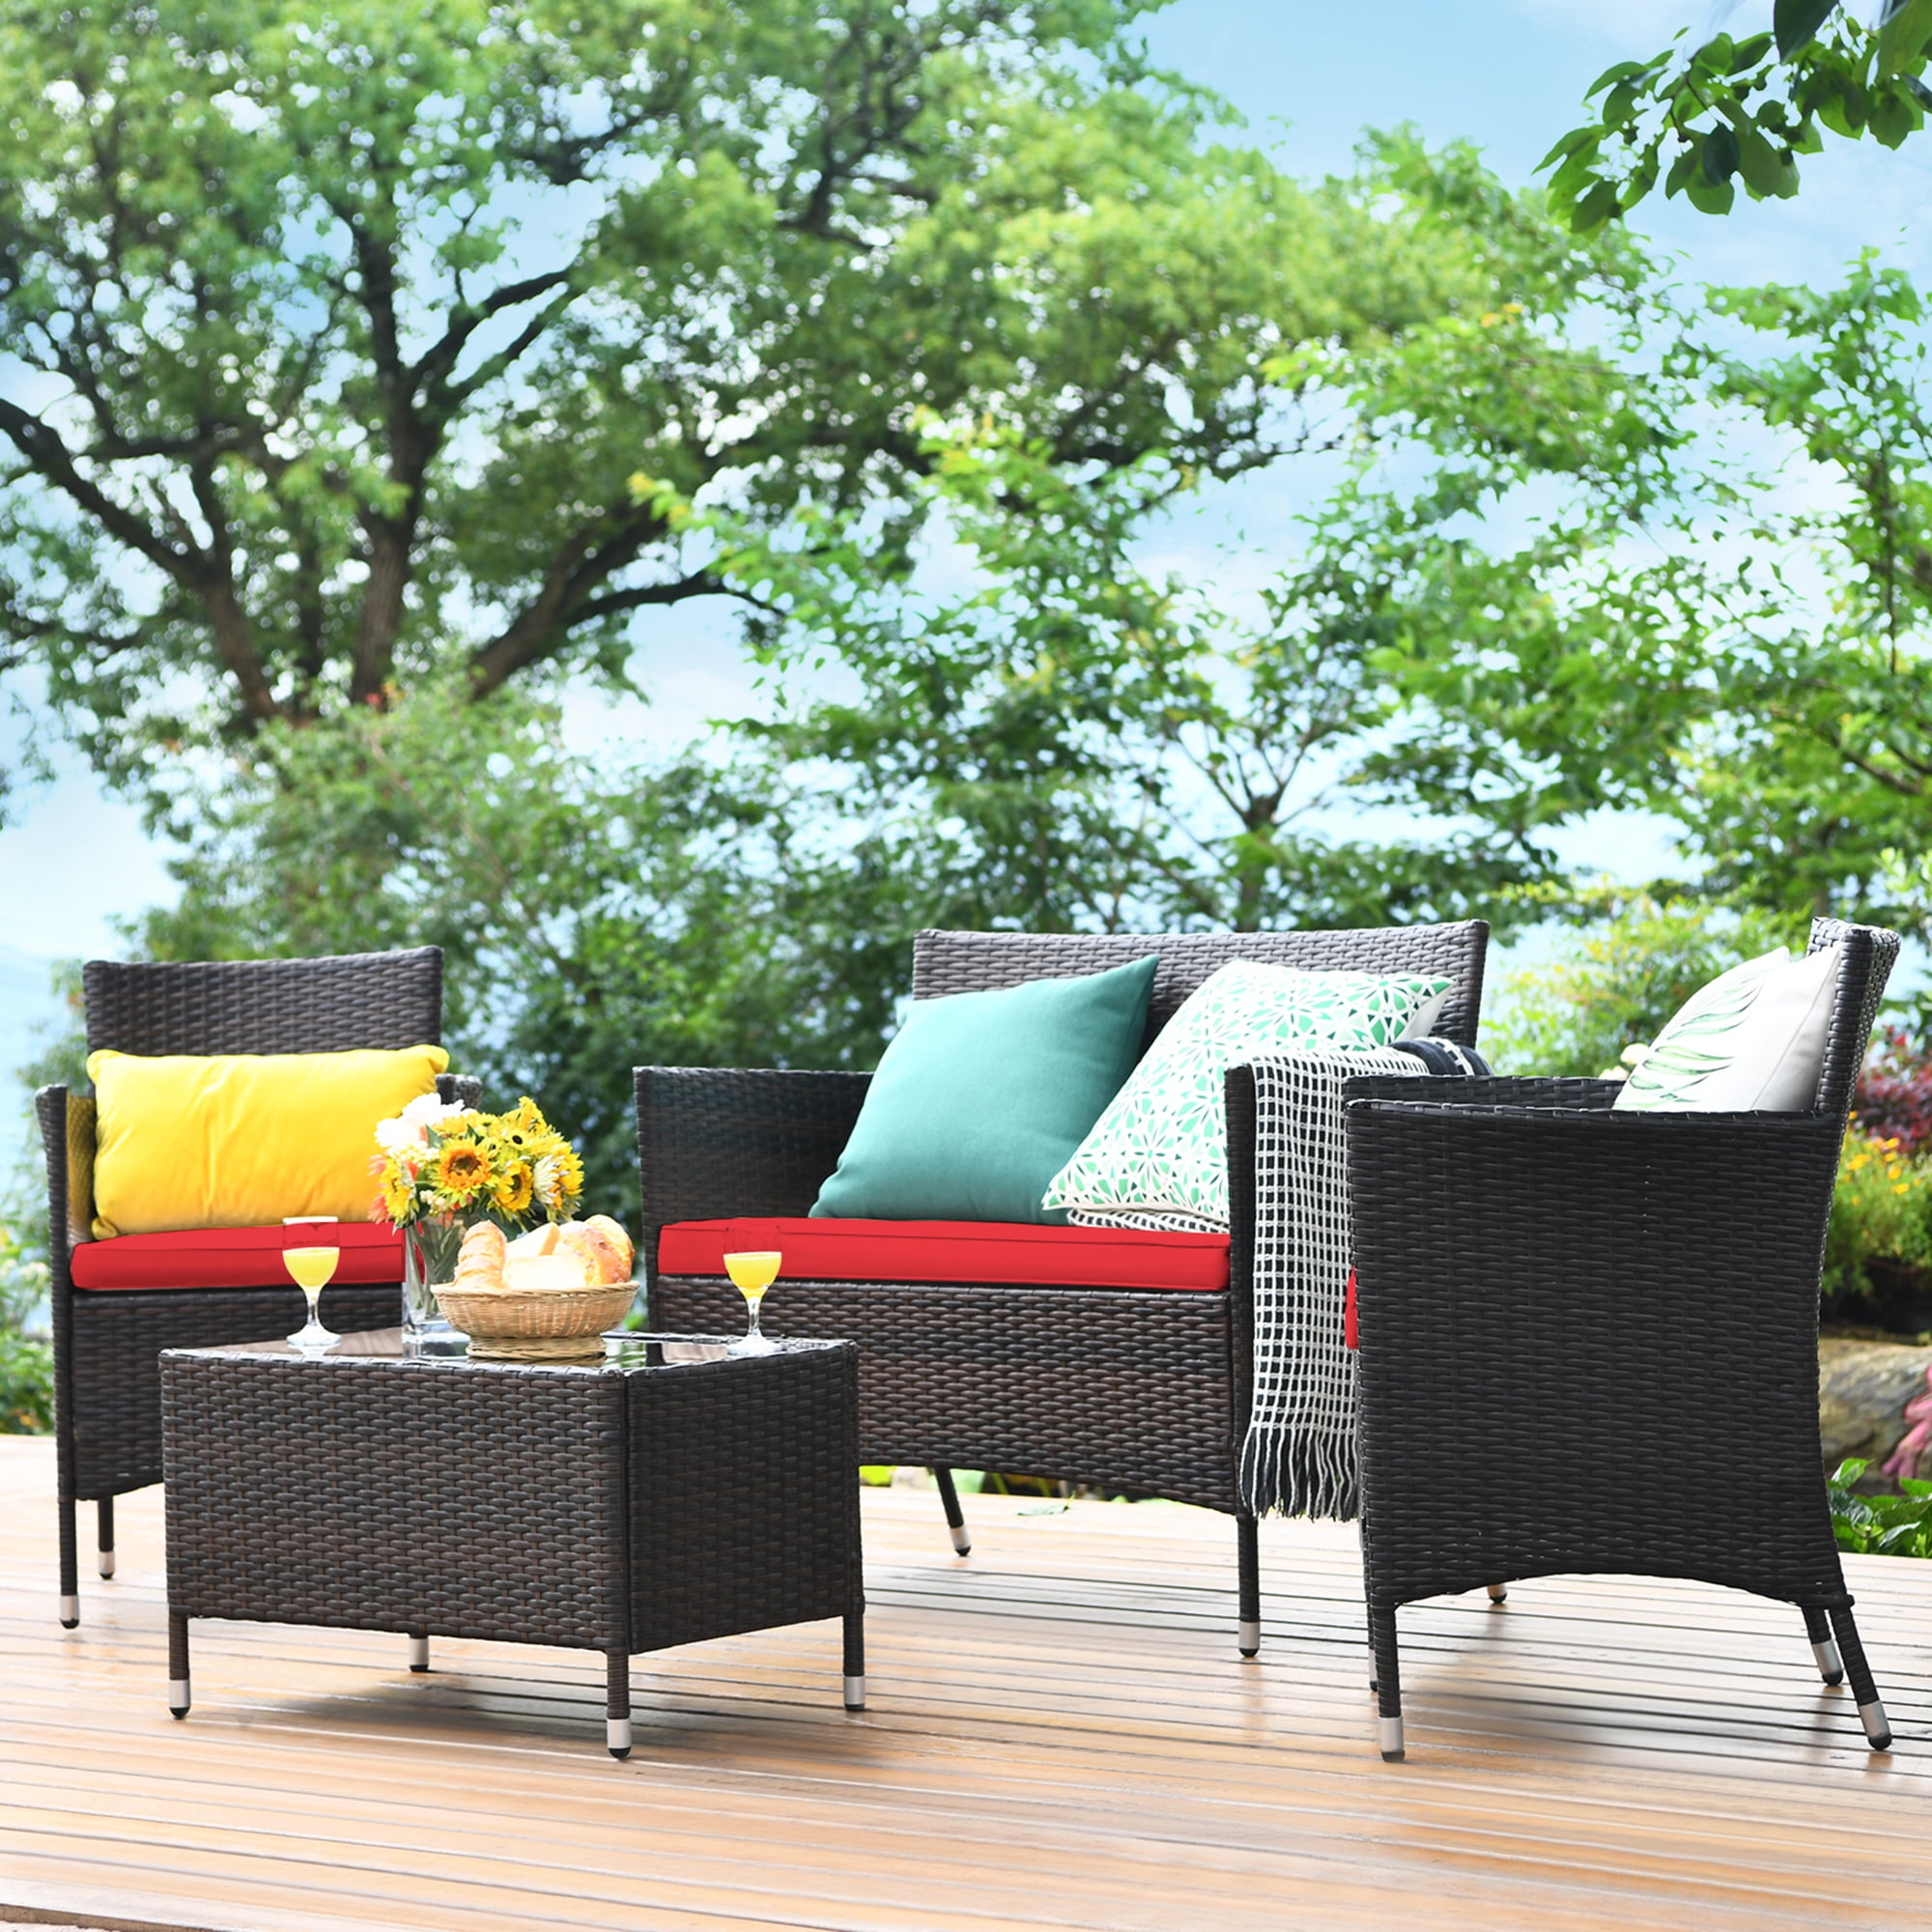 Gymax 4 Pieces Patio Rattan Conversation Furniture Set Outdoor with Red Cushion